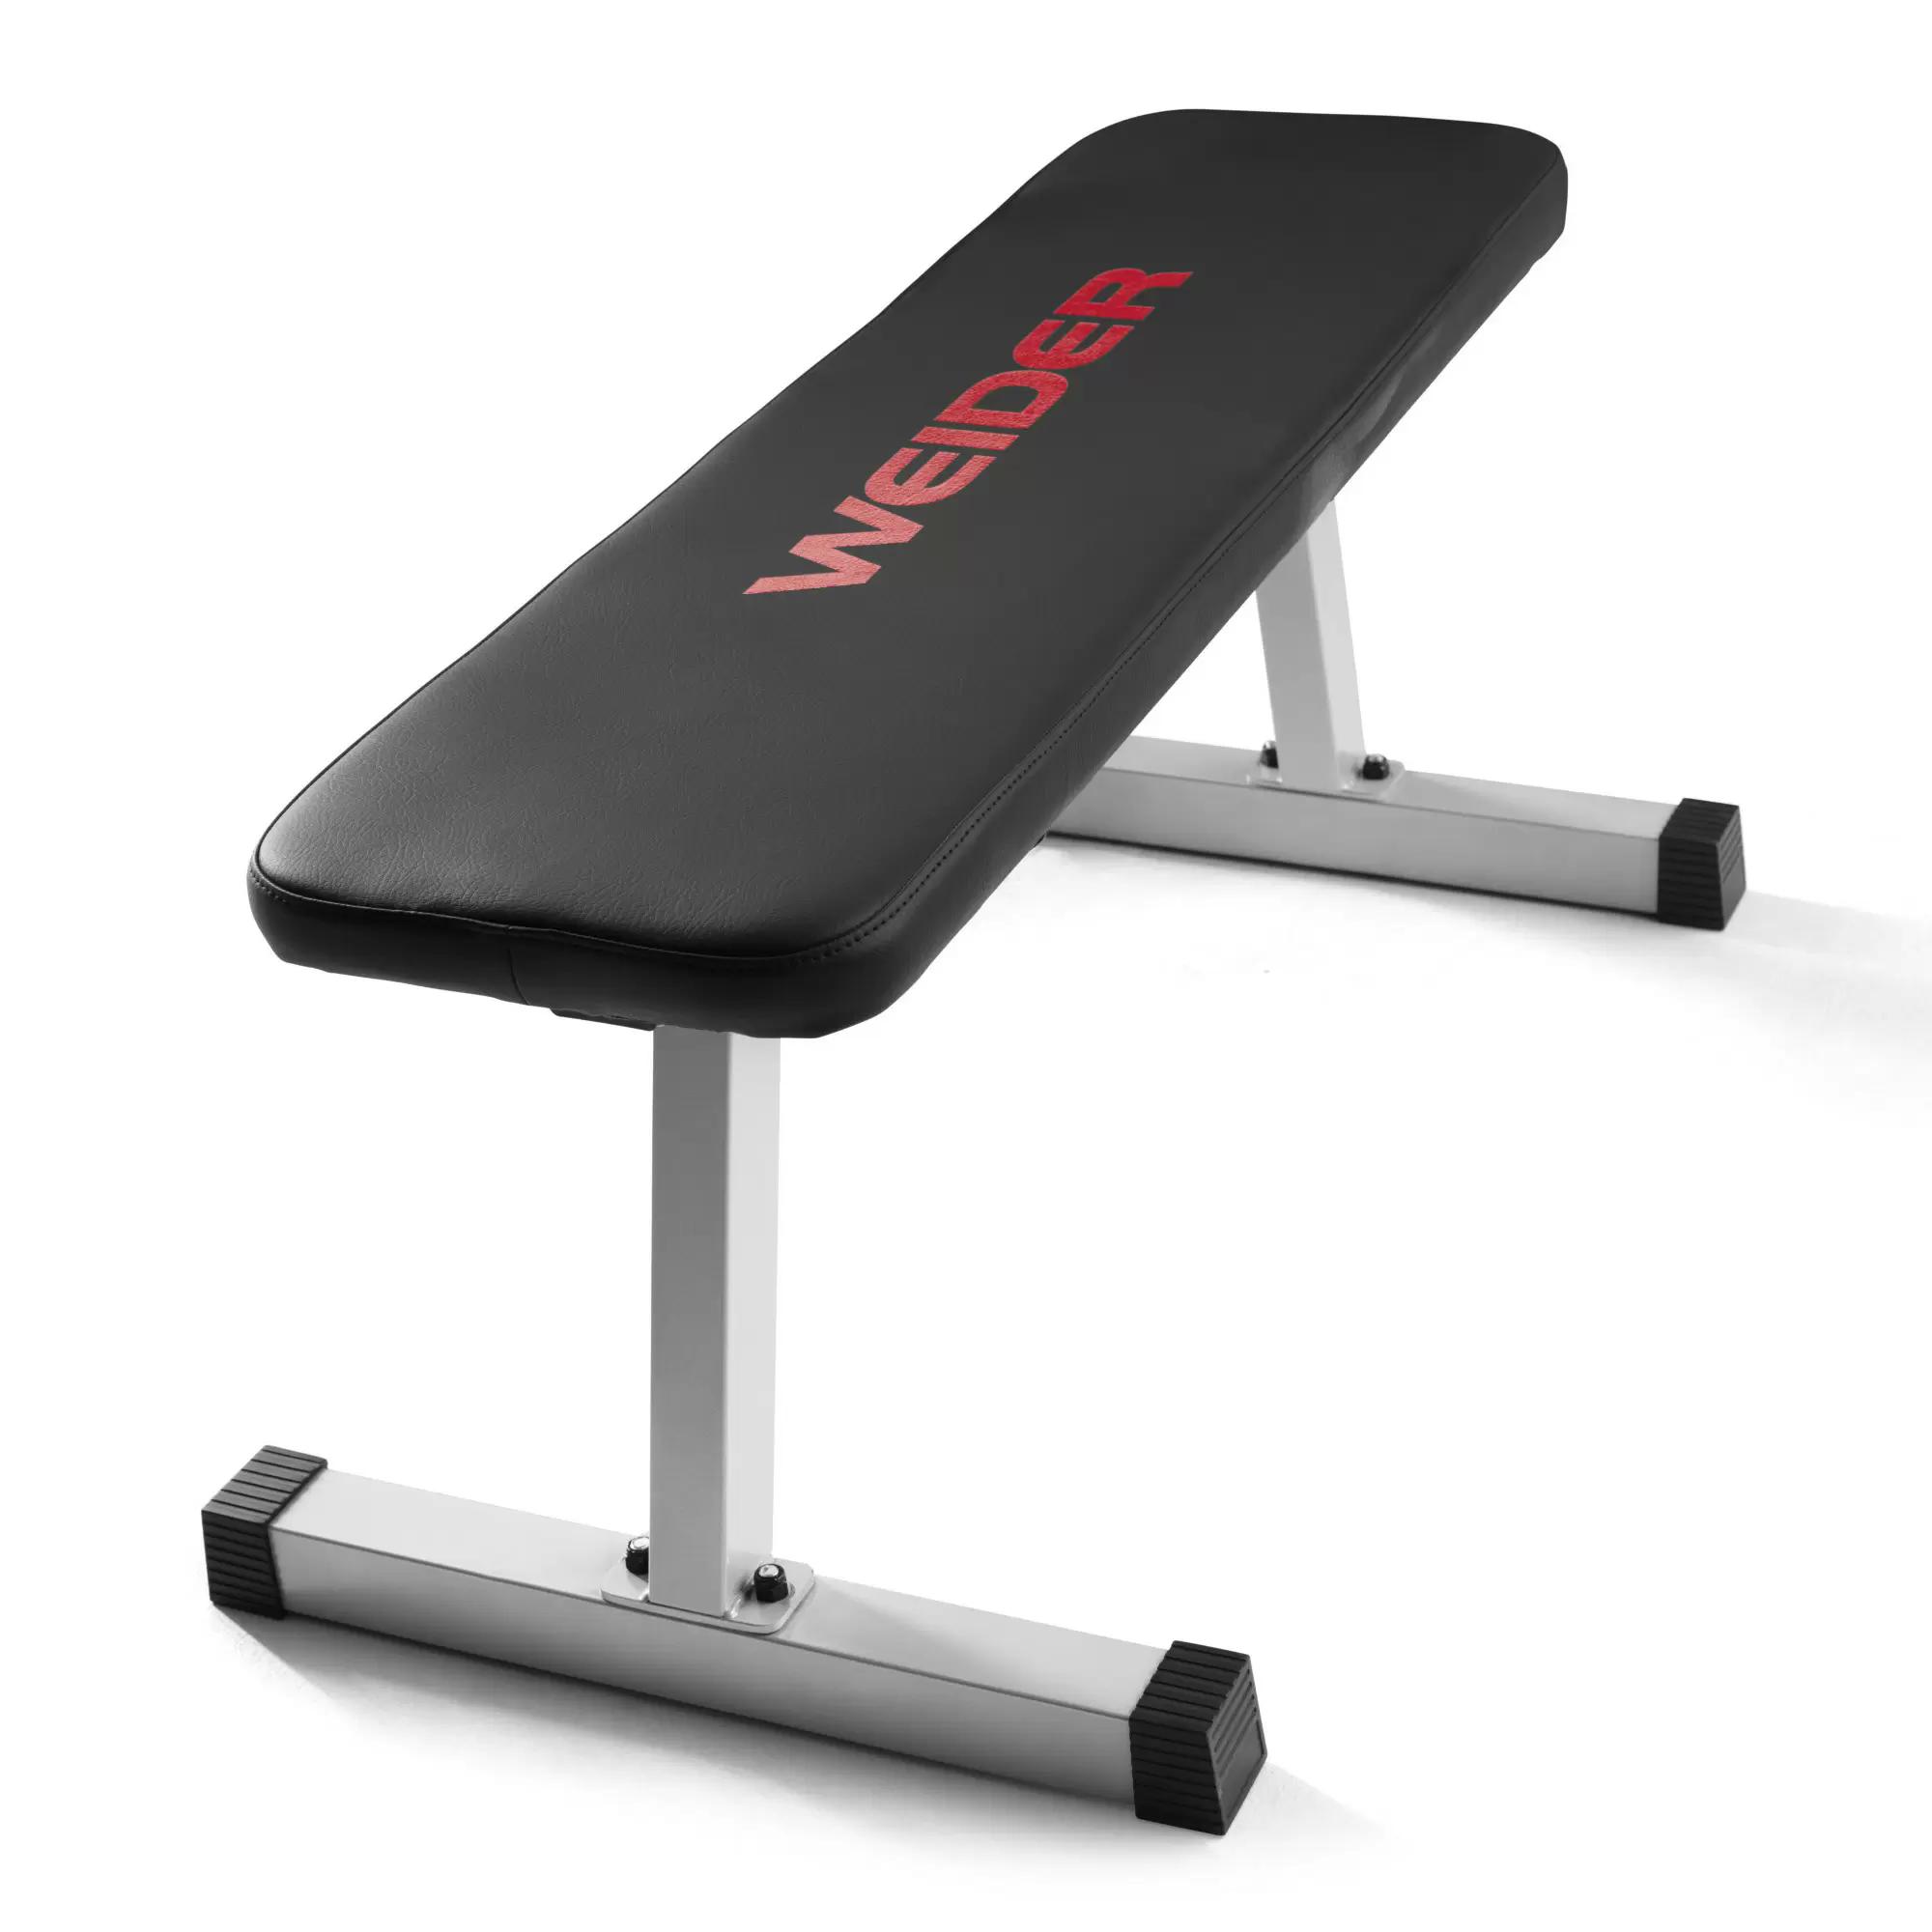 Weider Strength Flat Weight Bench for $39.99 Shipped